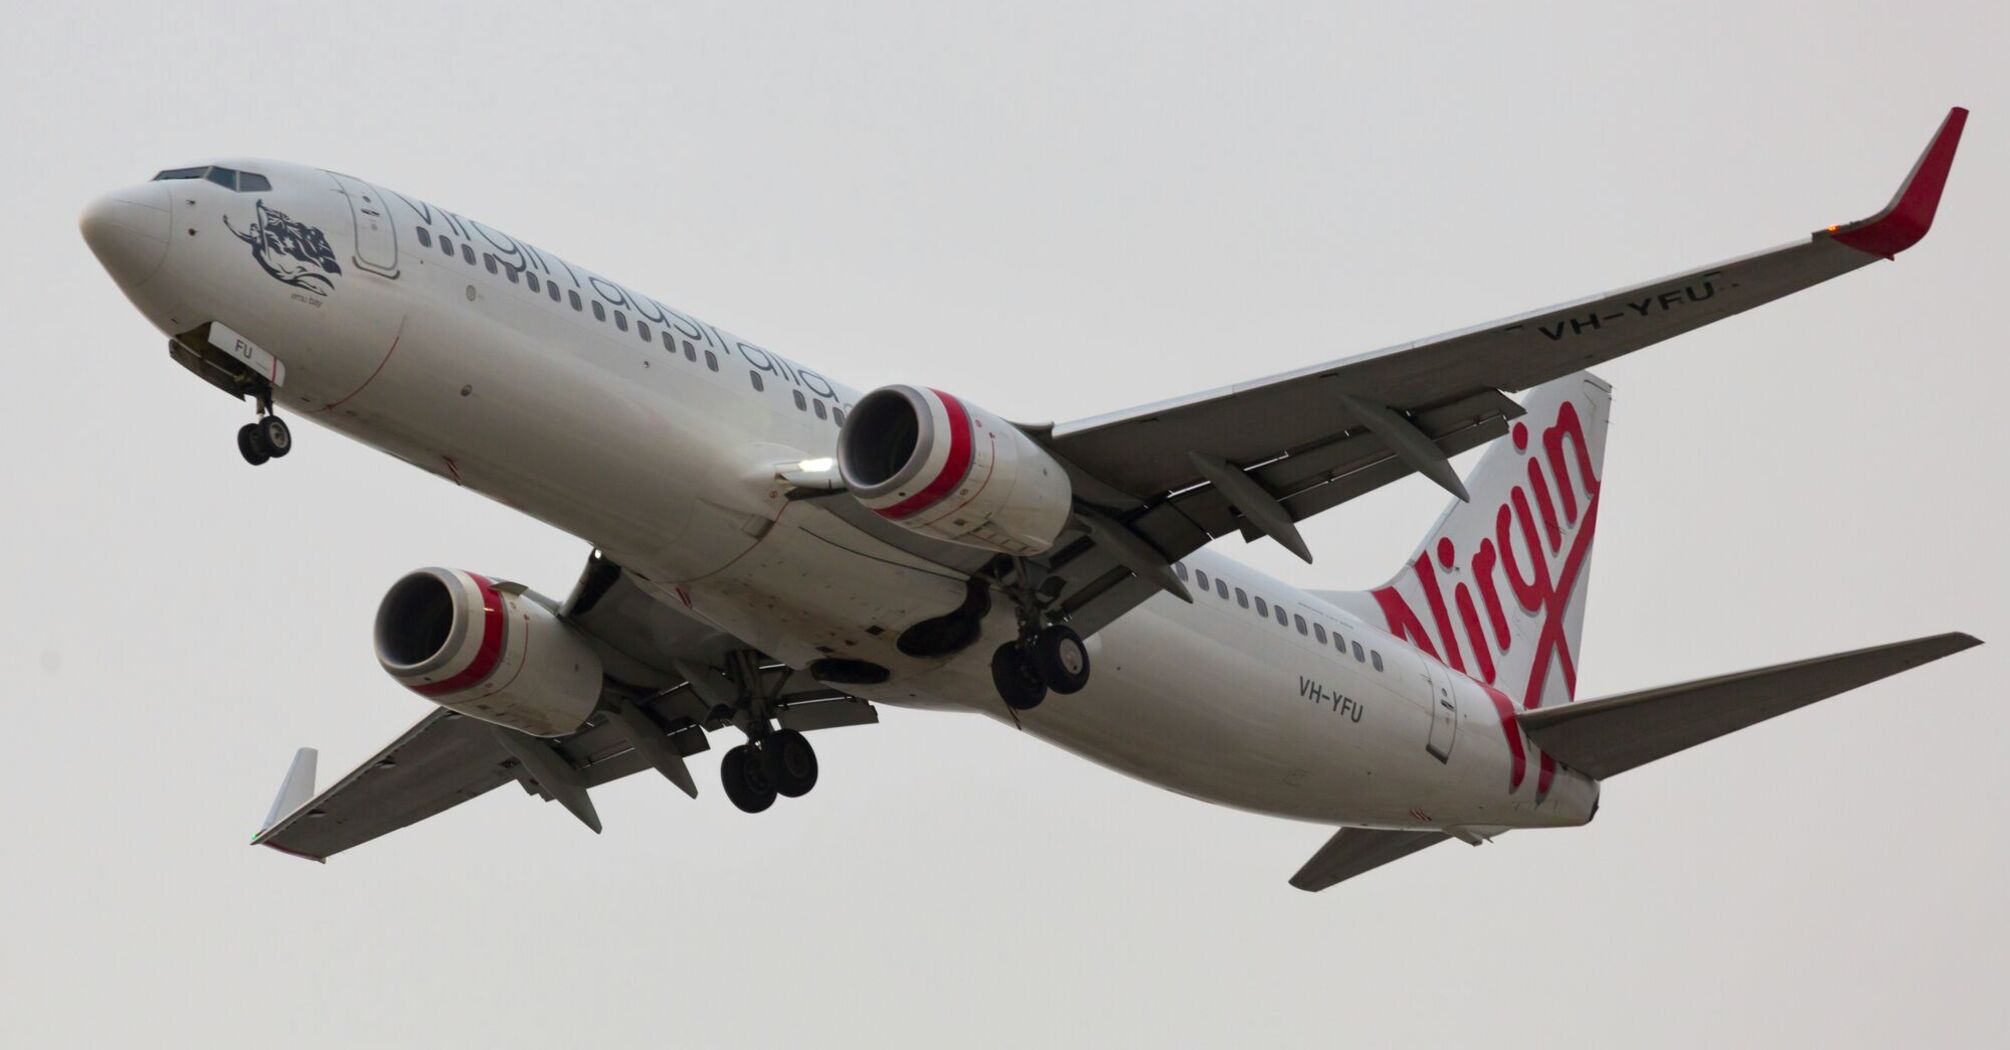 white and red Virgin Australia airplane in mid air during daytime